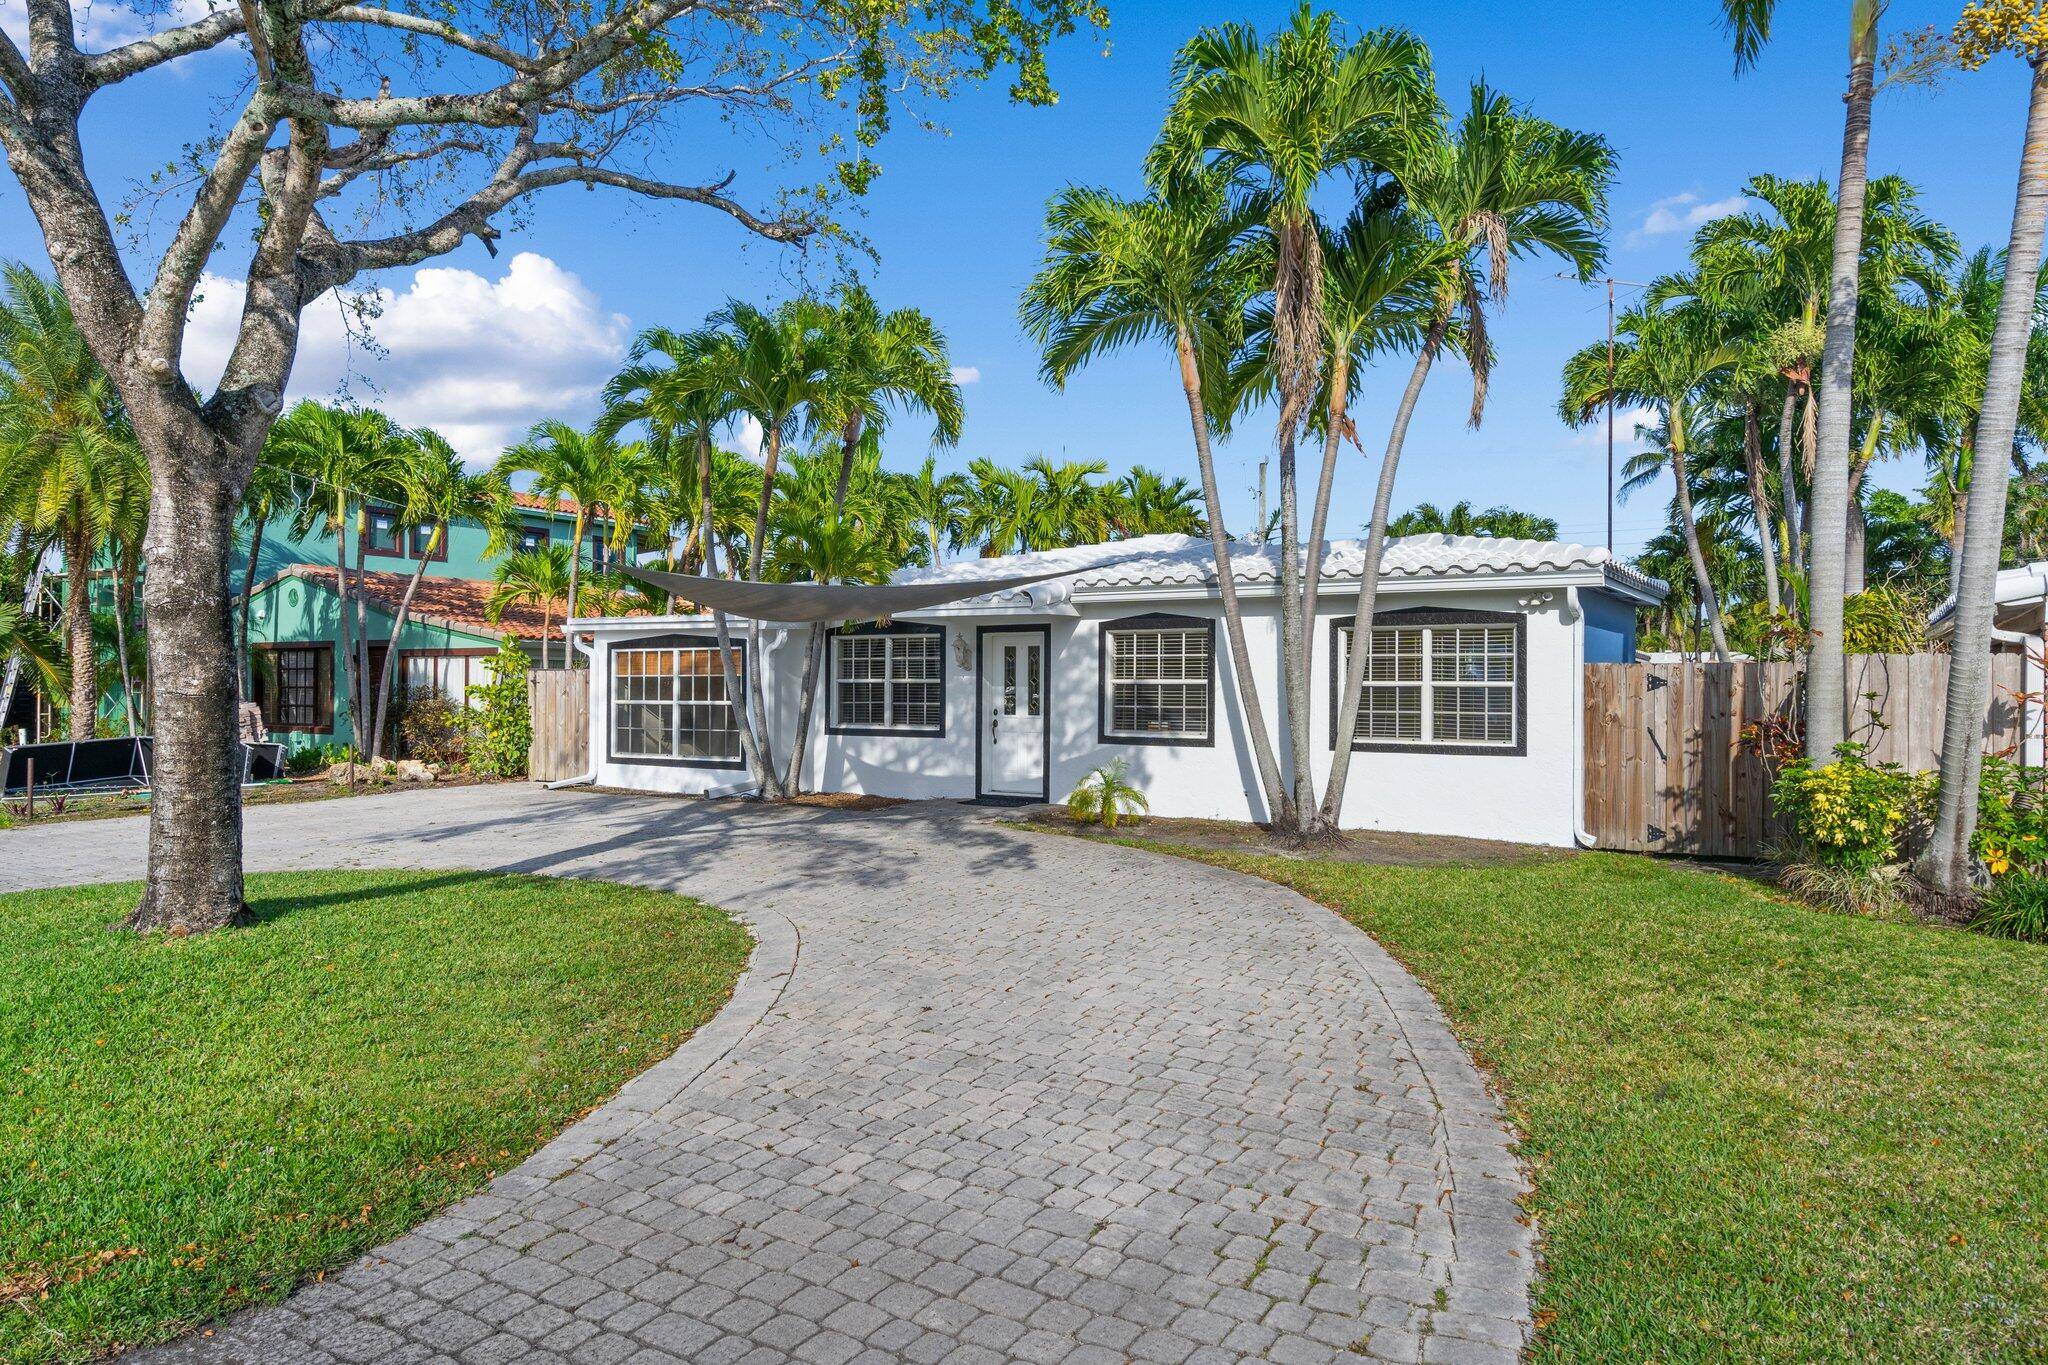 4 5 bedroom, 2 bathroom Pool home in the sought after community of Poinsettia Heights in Fort Lauderdale.